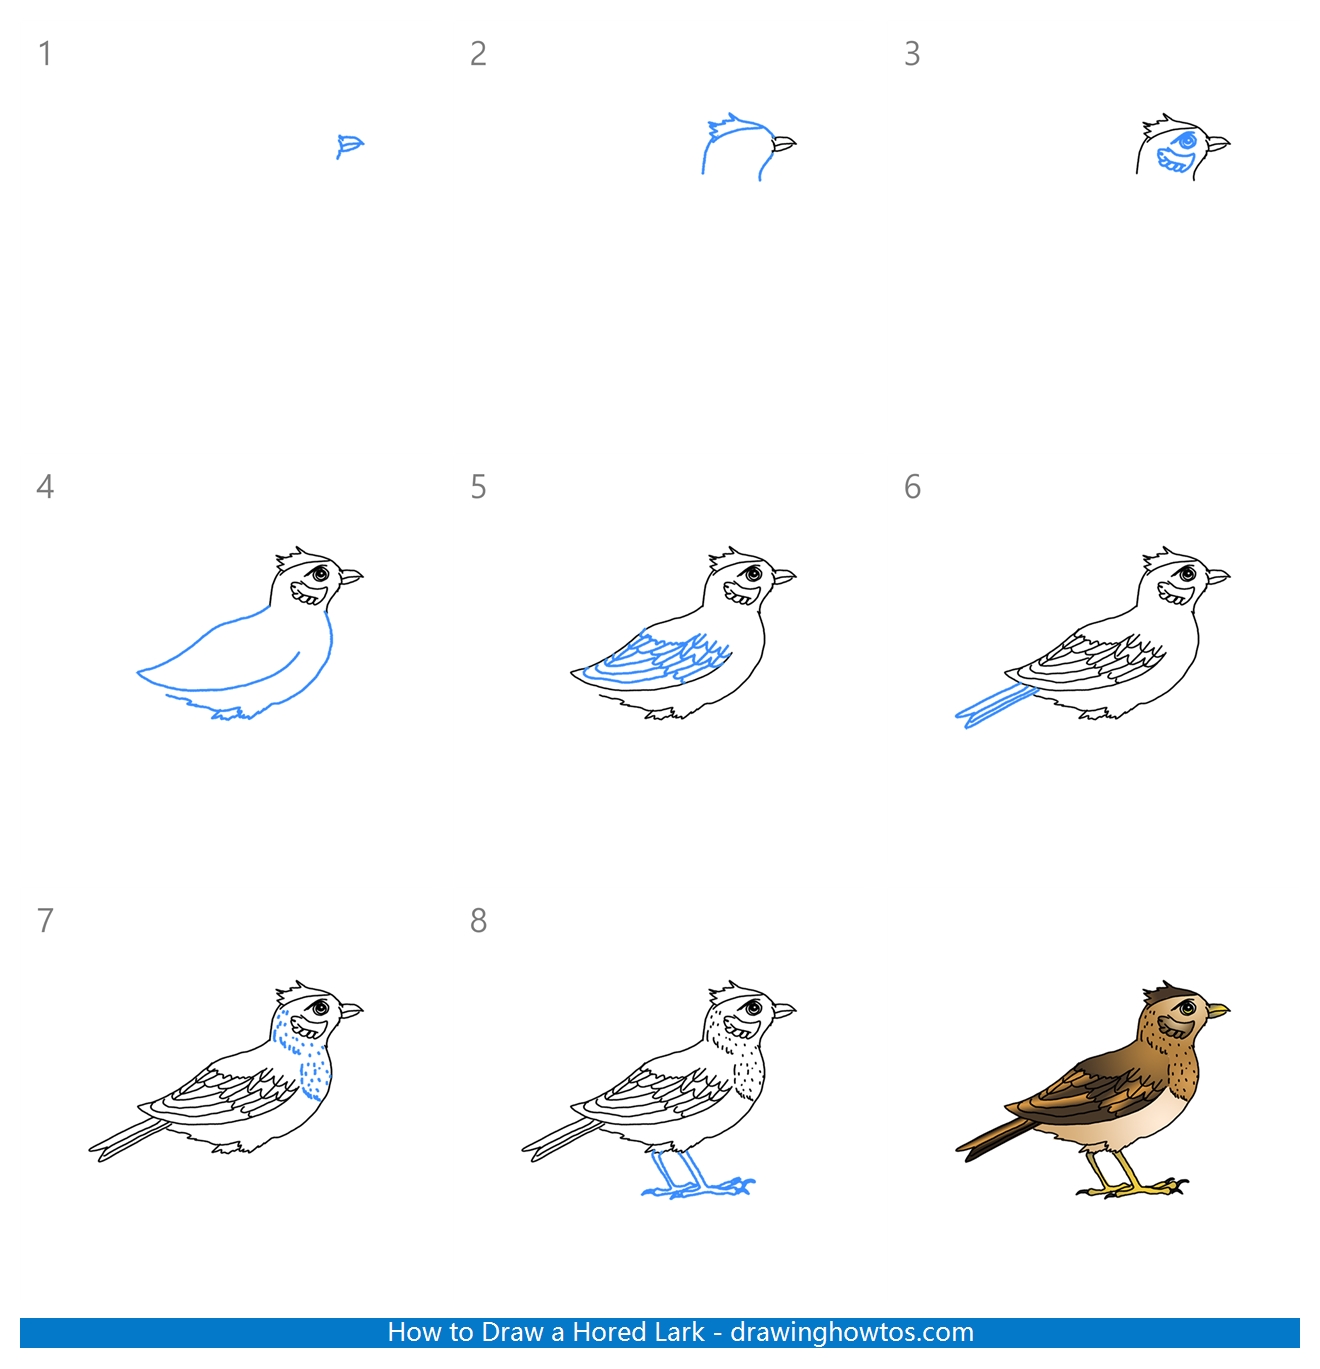 How to Draw a Horned Lark Step by Step